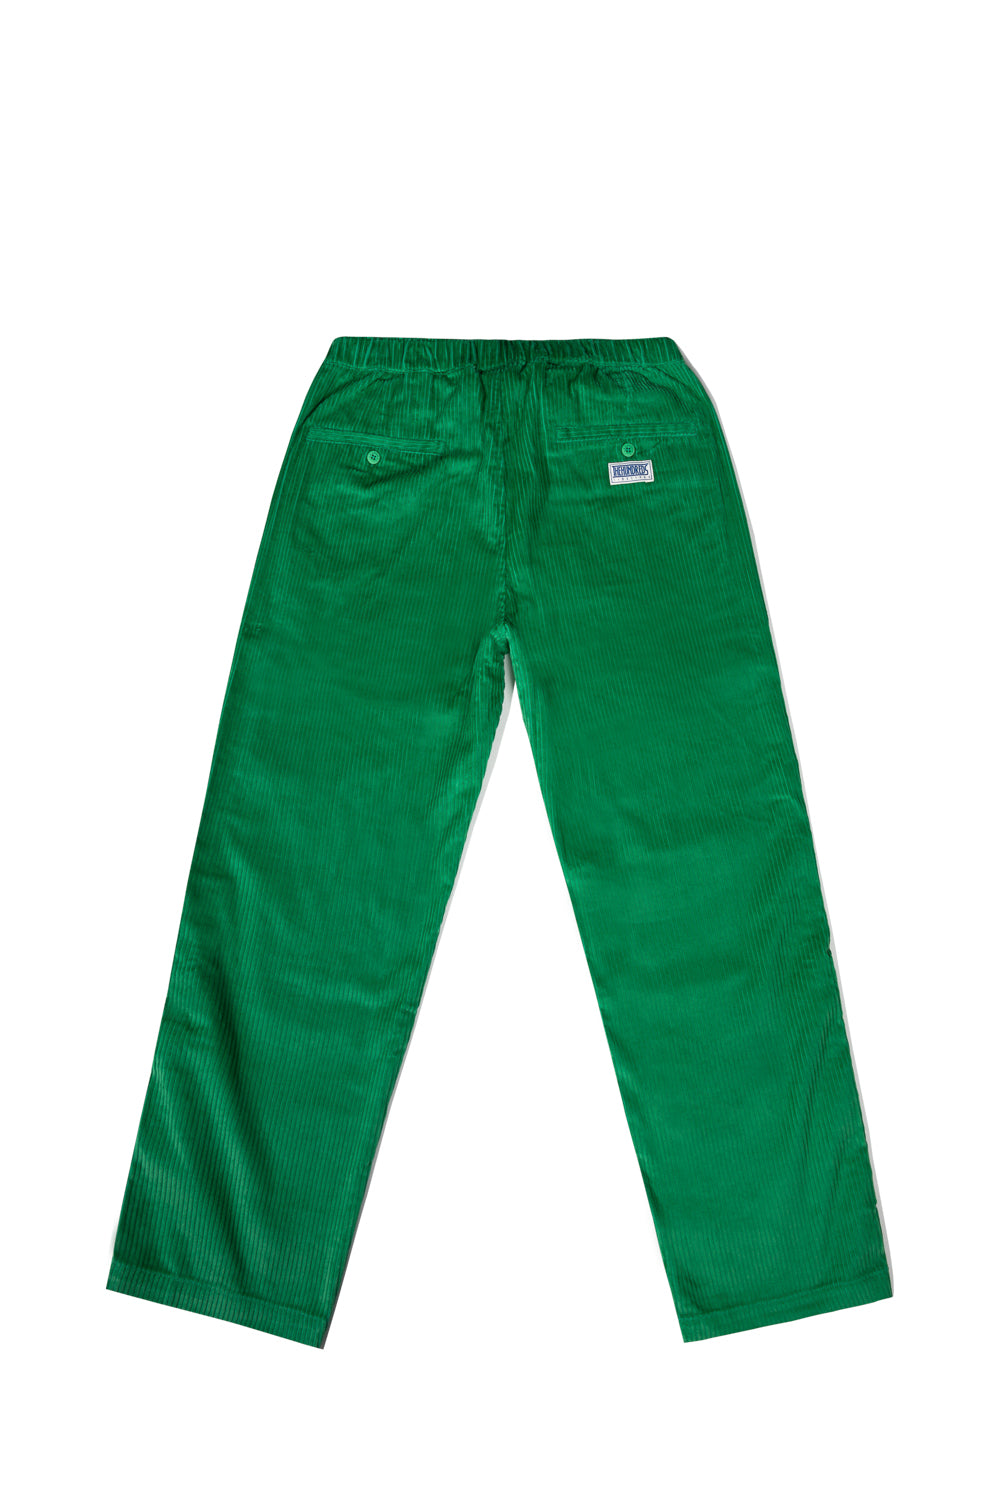 The Hundreds Cord Pants - Green – Urbn Lot